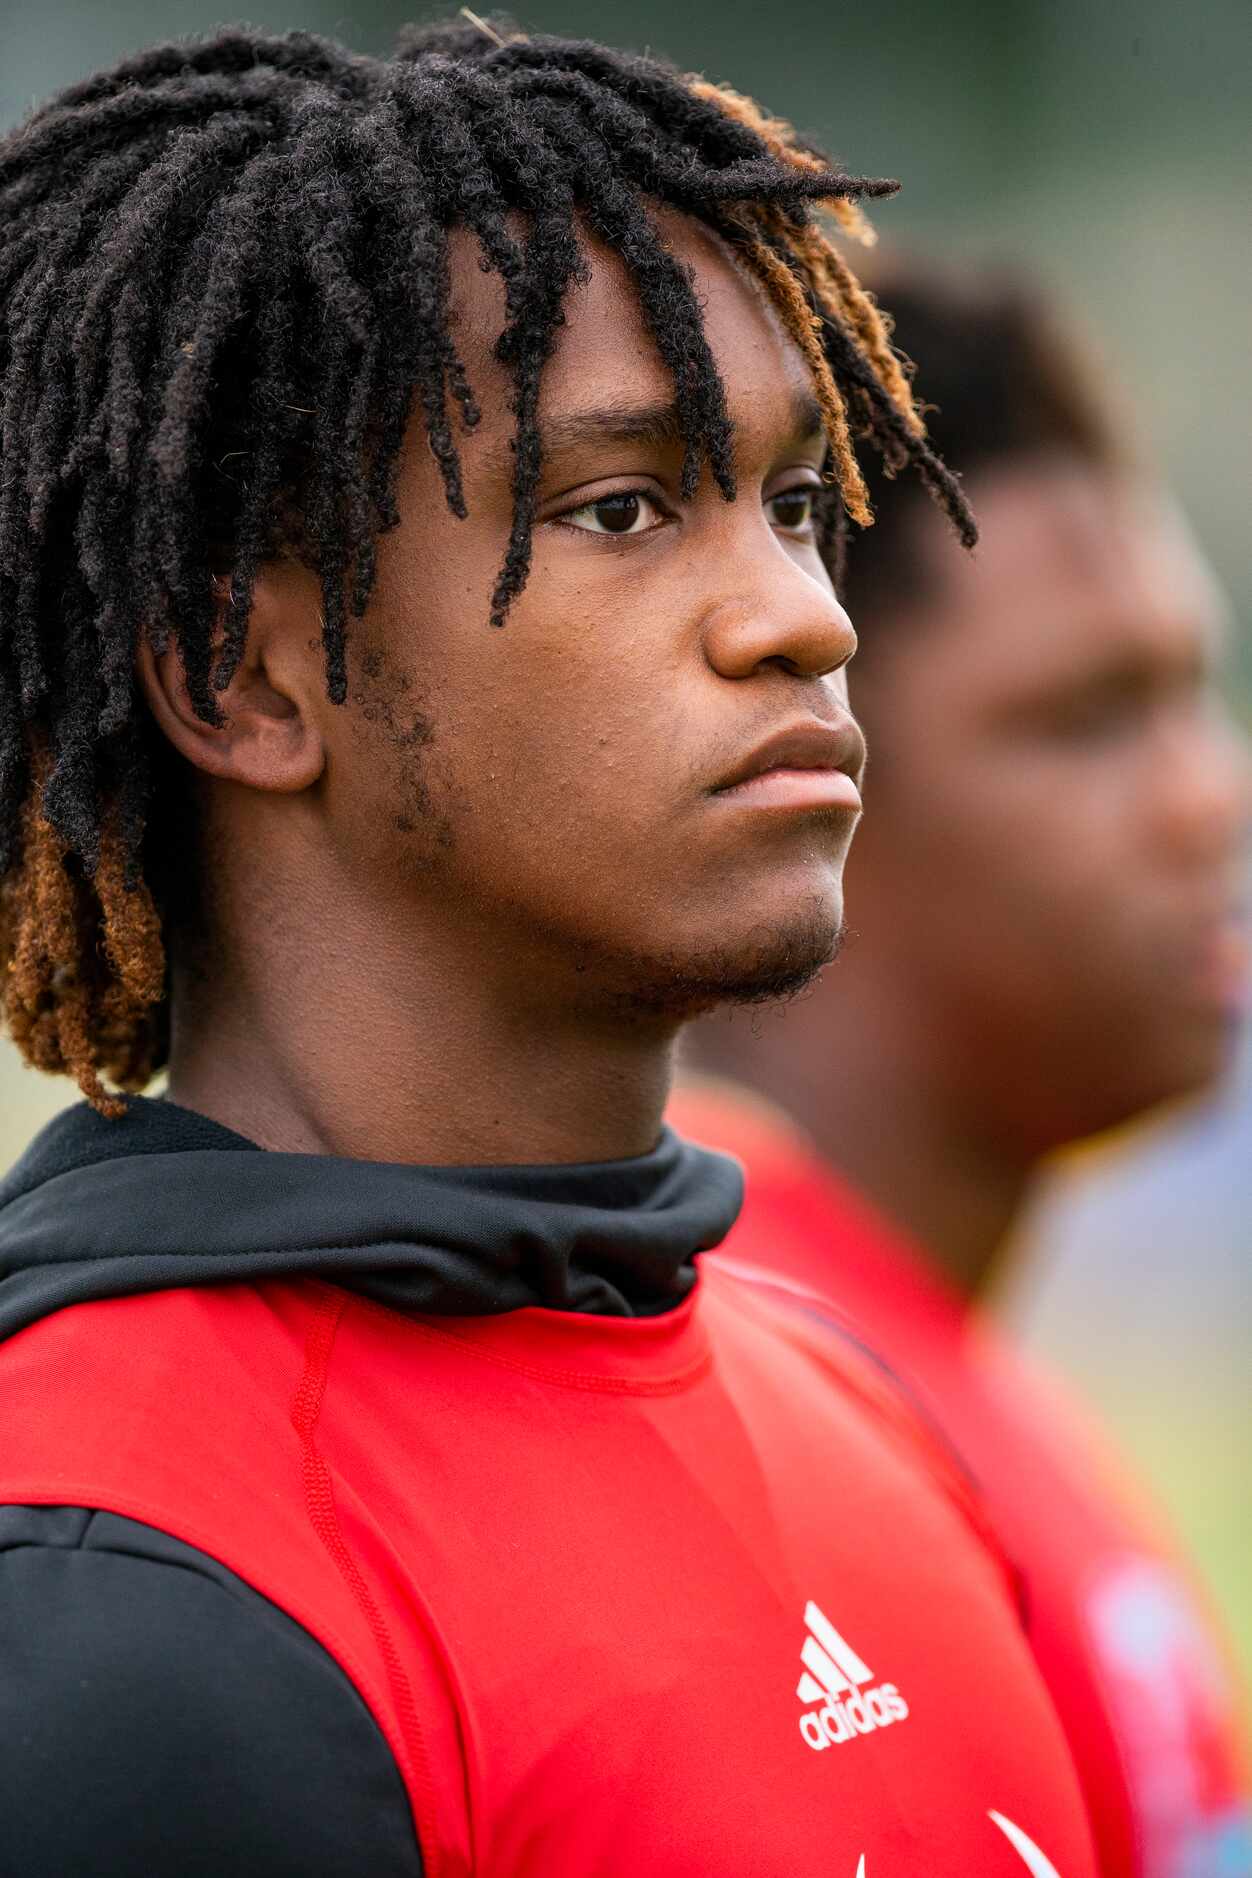 Carter senior linebacker Janari Hyder looks on during the first day of football practice at...